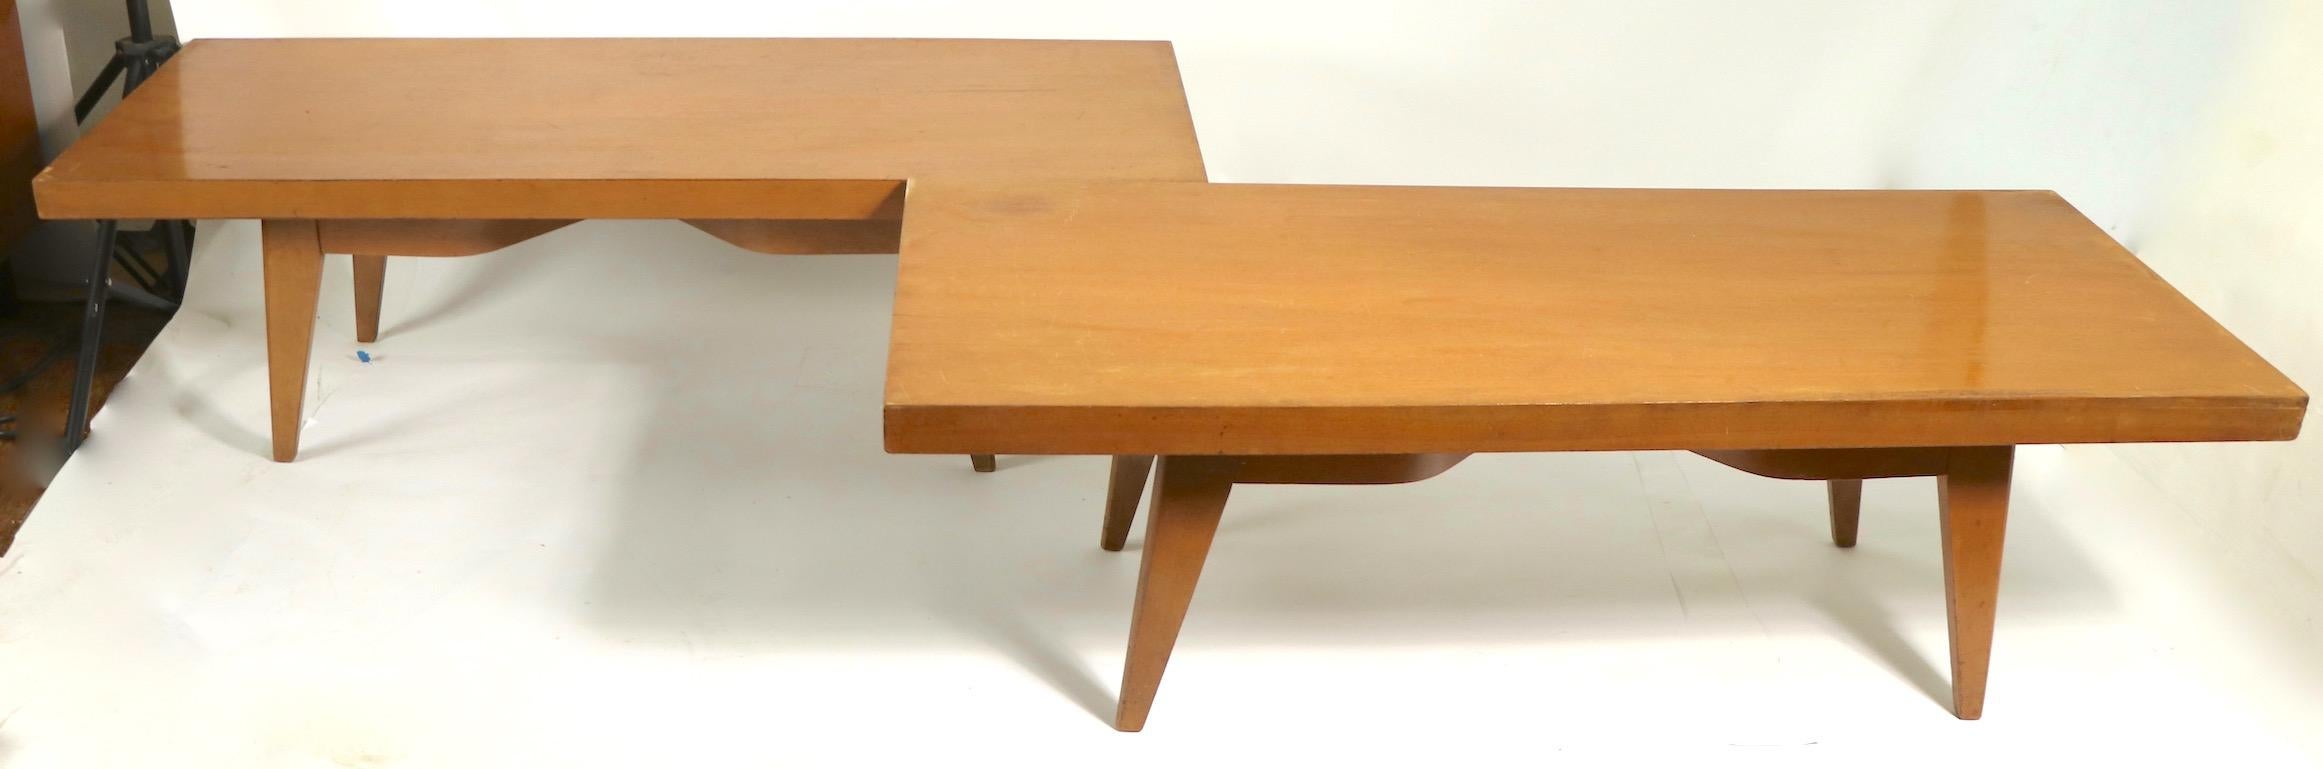 2 Mid Century Coffee Tables attributed to Russel Wright For Sale 2